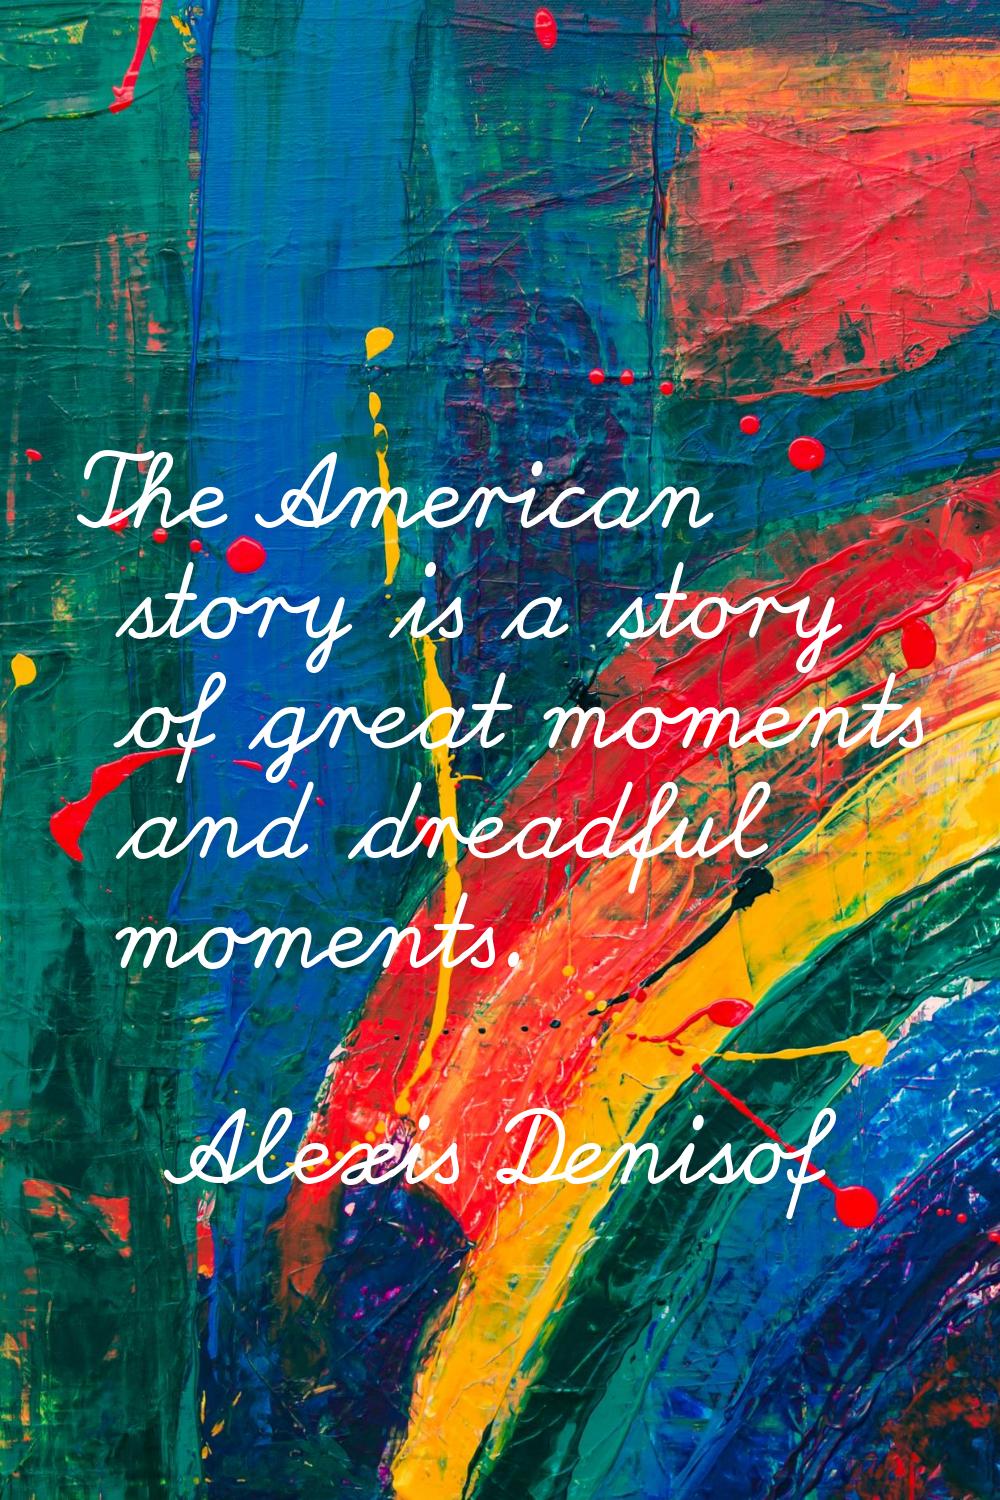 The American story is a story of great moments and dreadful moments.